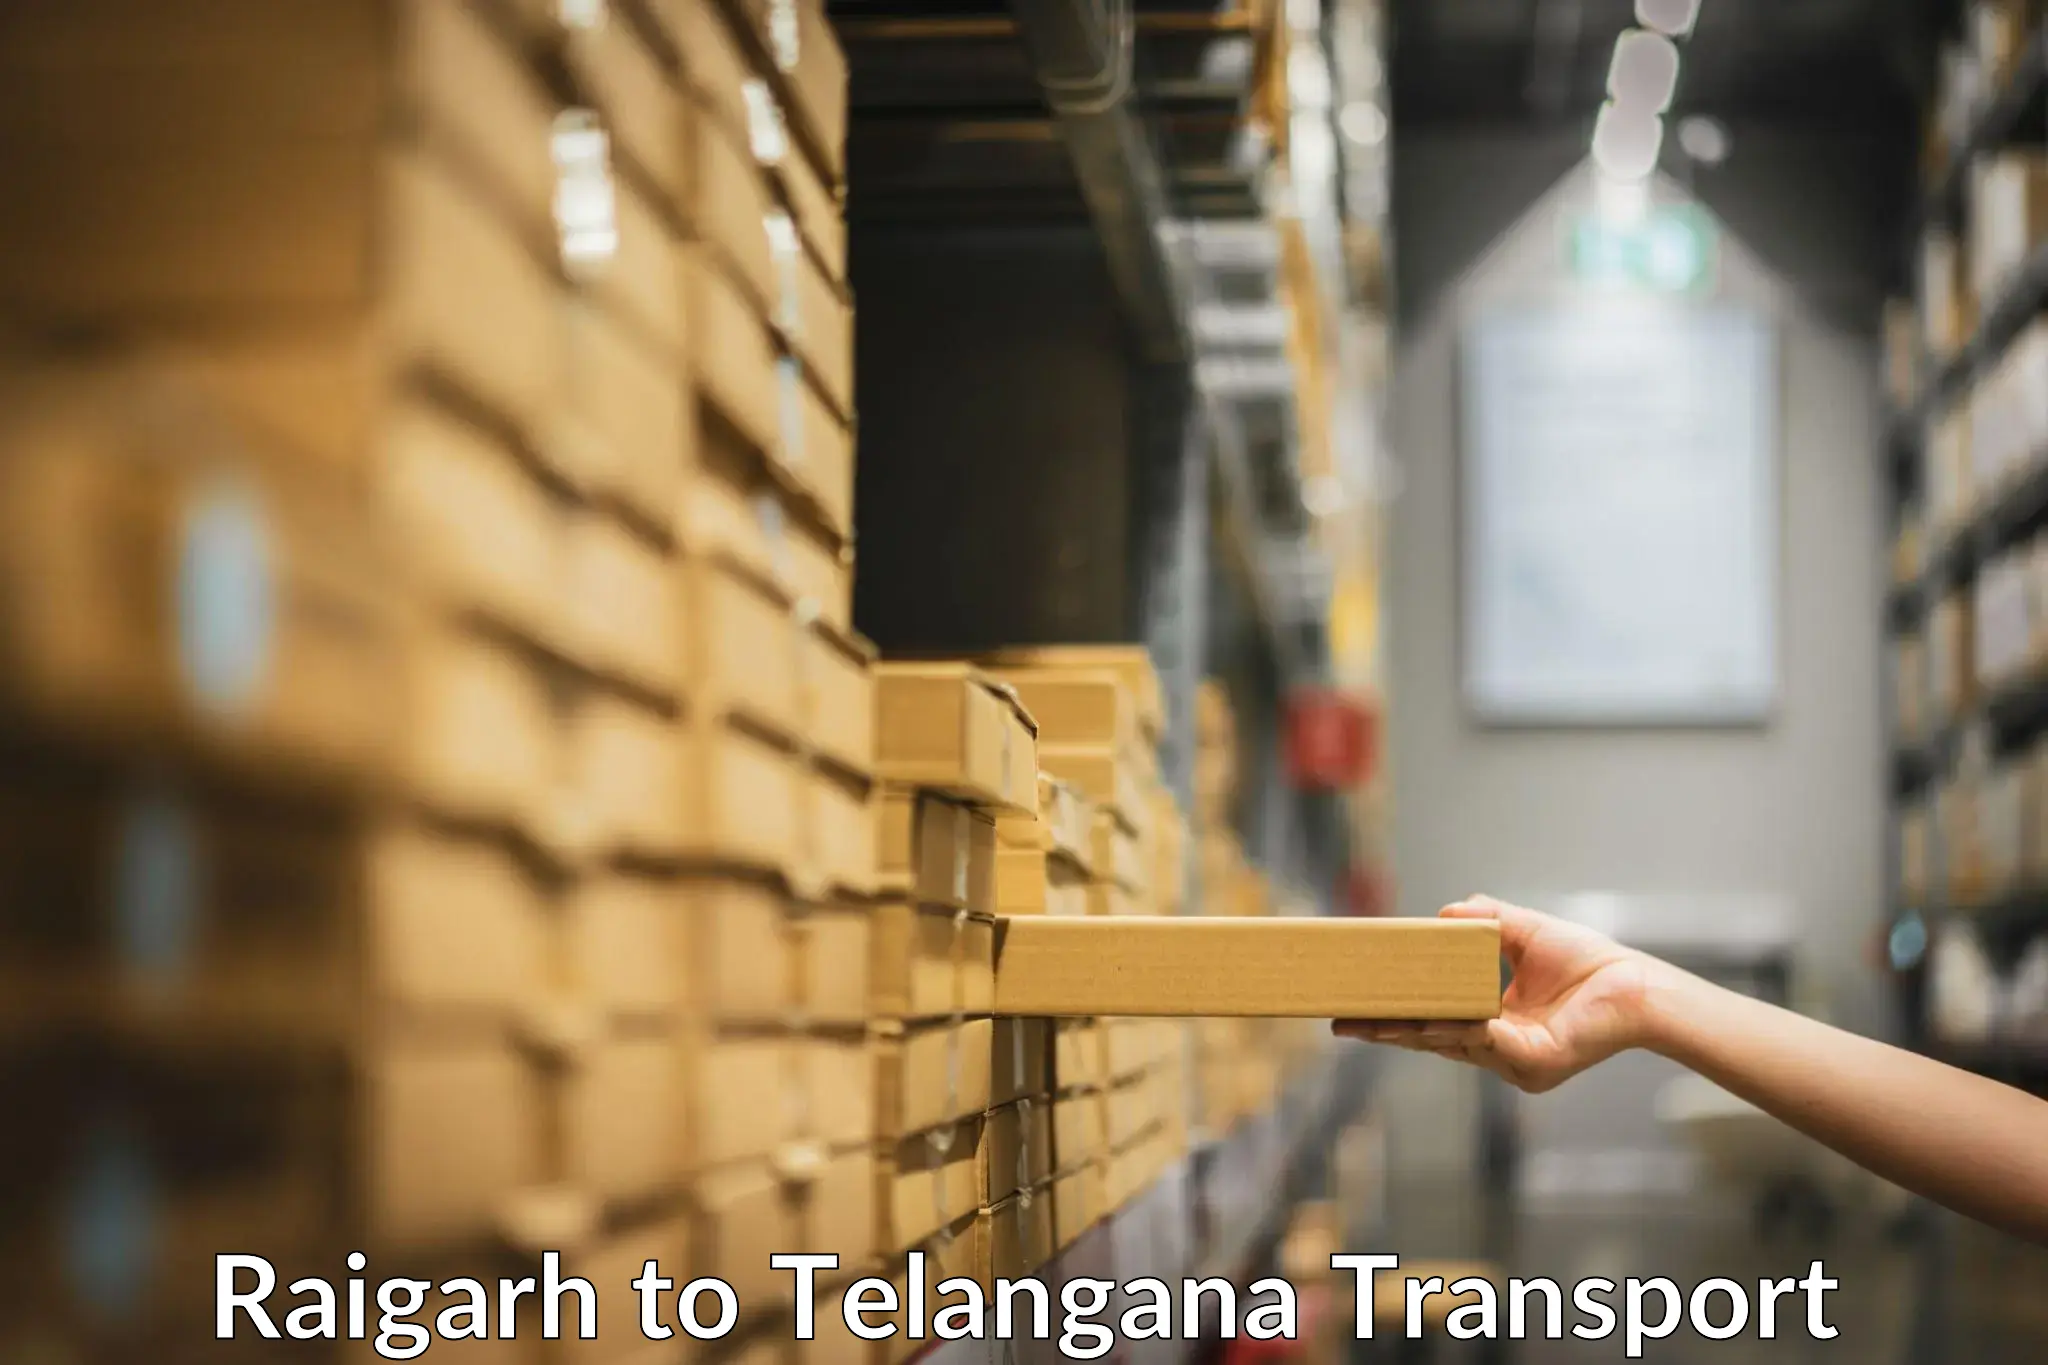 Container transport service Raigarh to Warangal